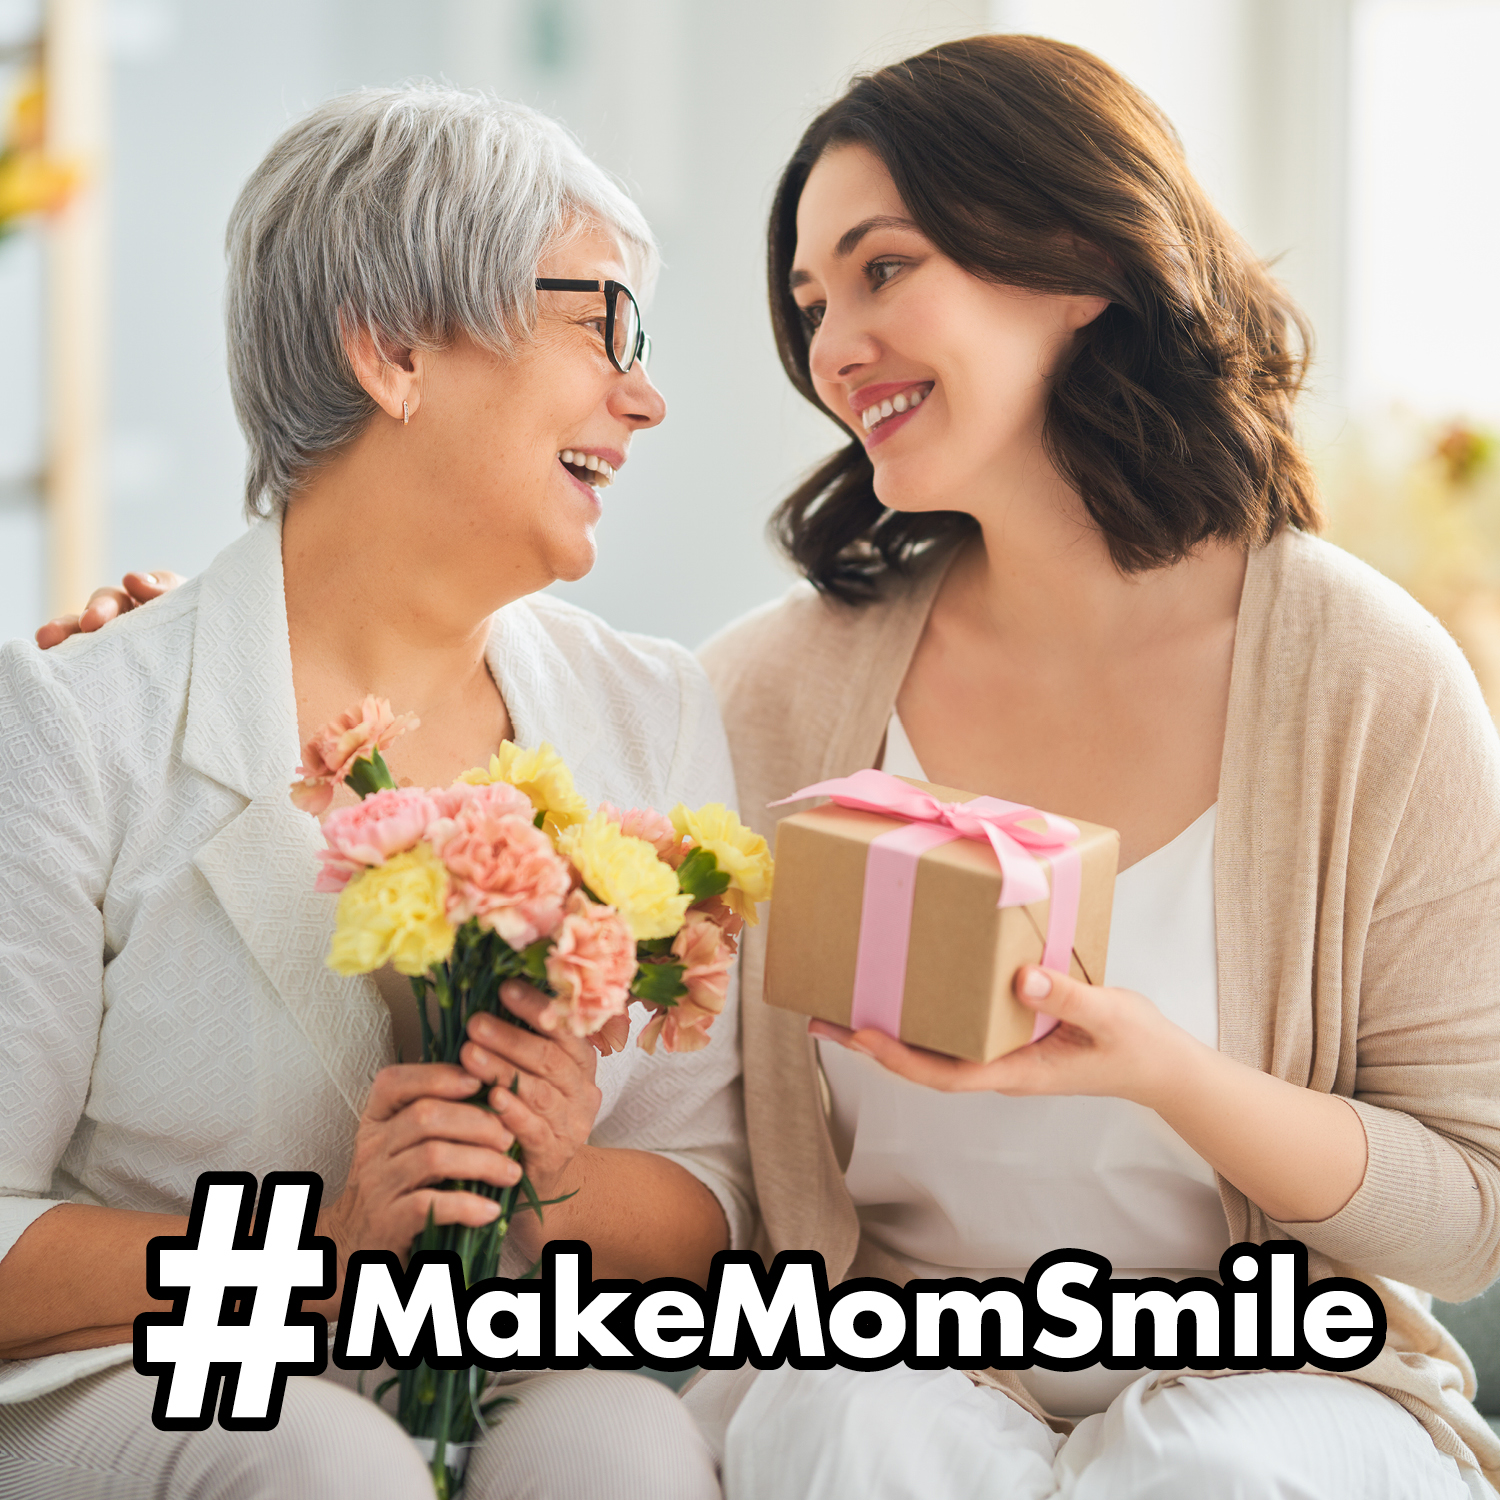 adult daughter gifting mom flowers and a small gift #MakeMomSmile